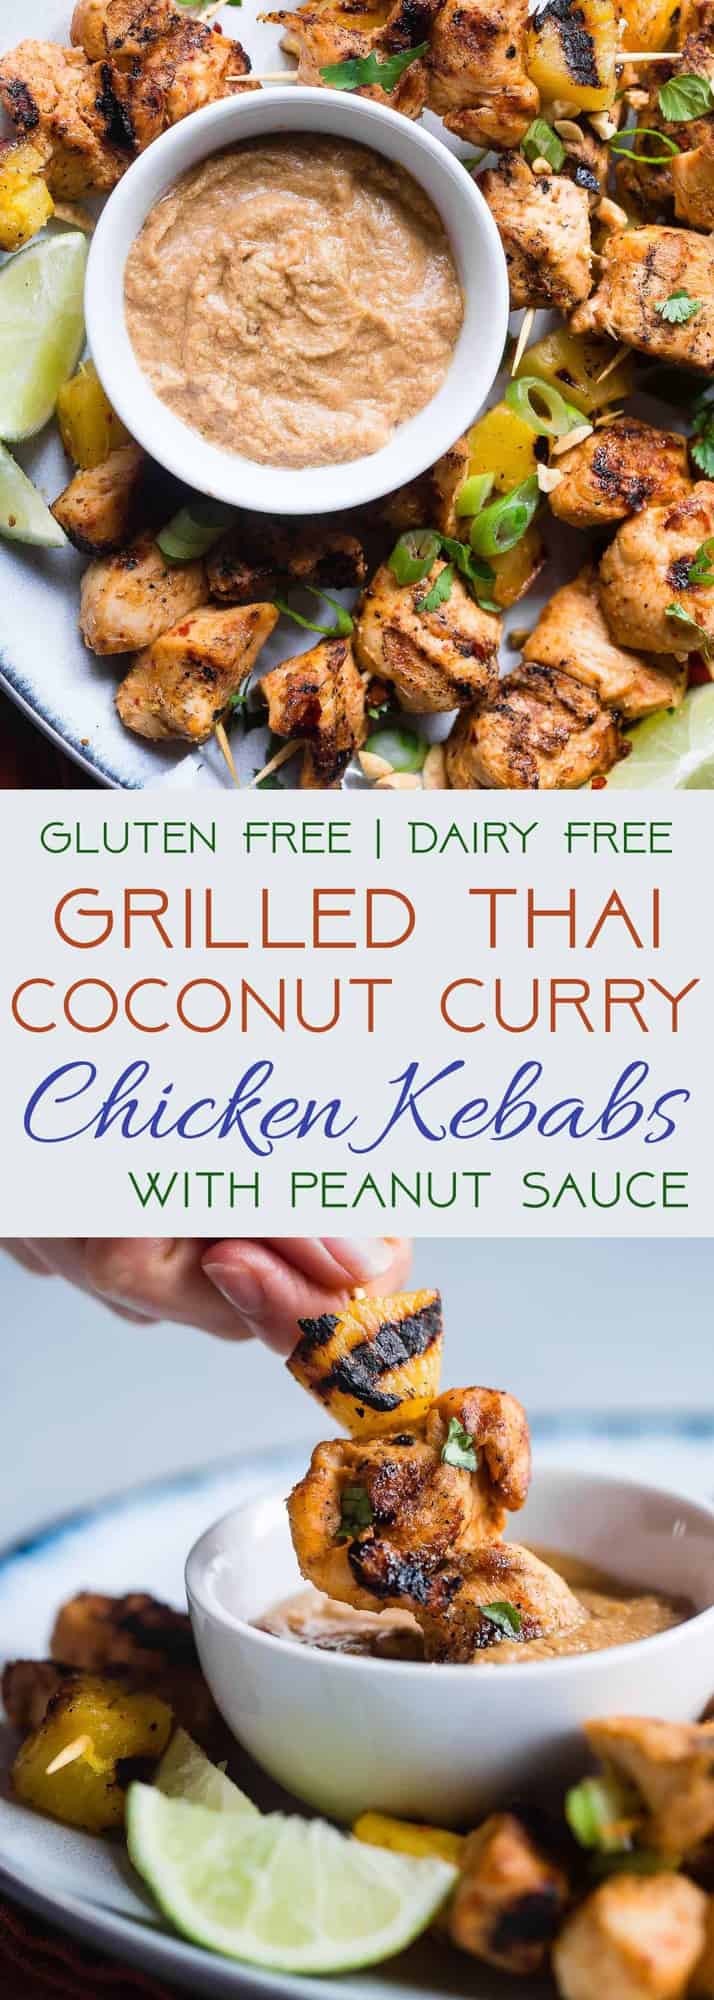 Grilled Pineapple Thai Chicken Skewers with Peanut Sauce - Addictingly spicy, with just a bit of smoky and sweet! The perfect healthy, gluten free dinner for summer with a paleo option! | #Foodfaithfitness | #Glutenfree #Paleo #Healthy #Dairyfree #Chicken